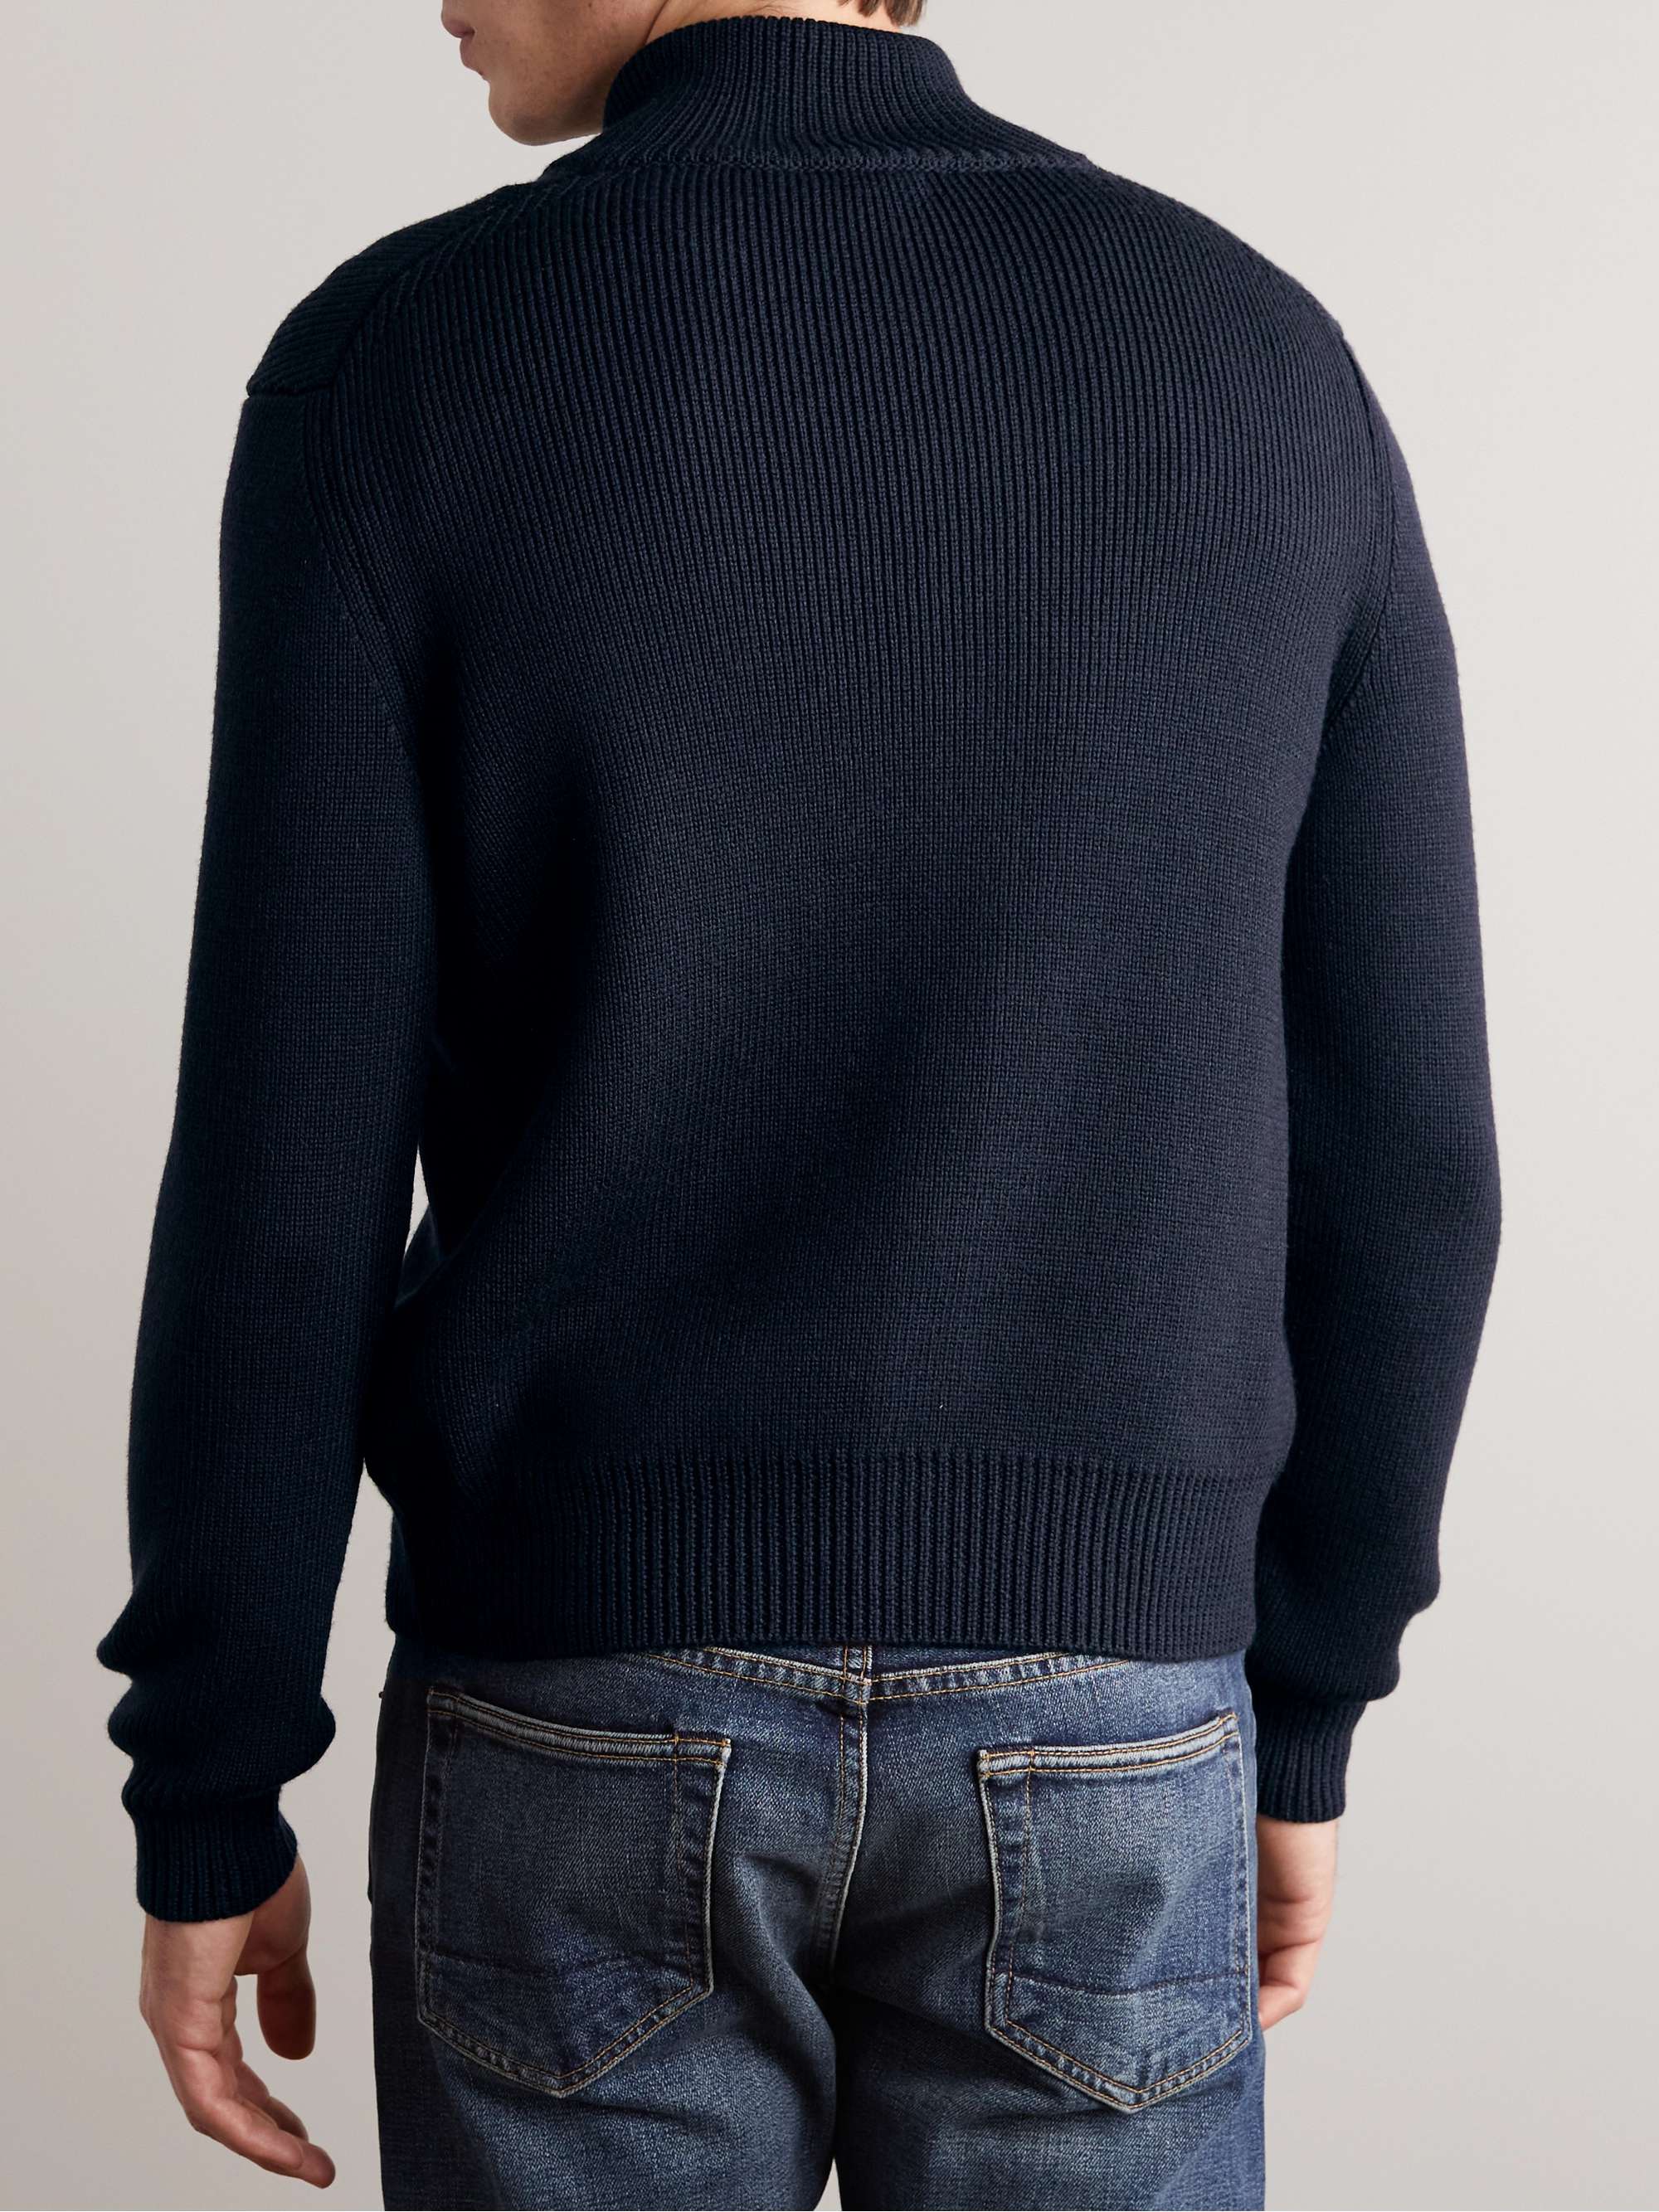 TOM FORD Ribbed Wool and Silk-Blend Cardigan for Men | MR PORTER